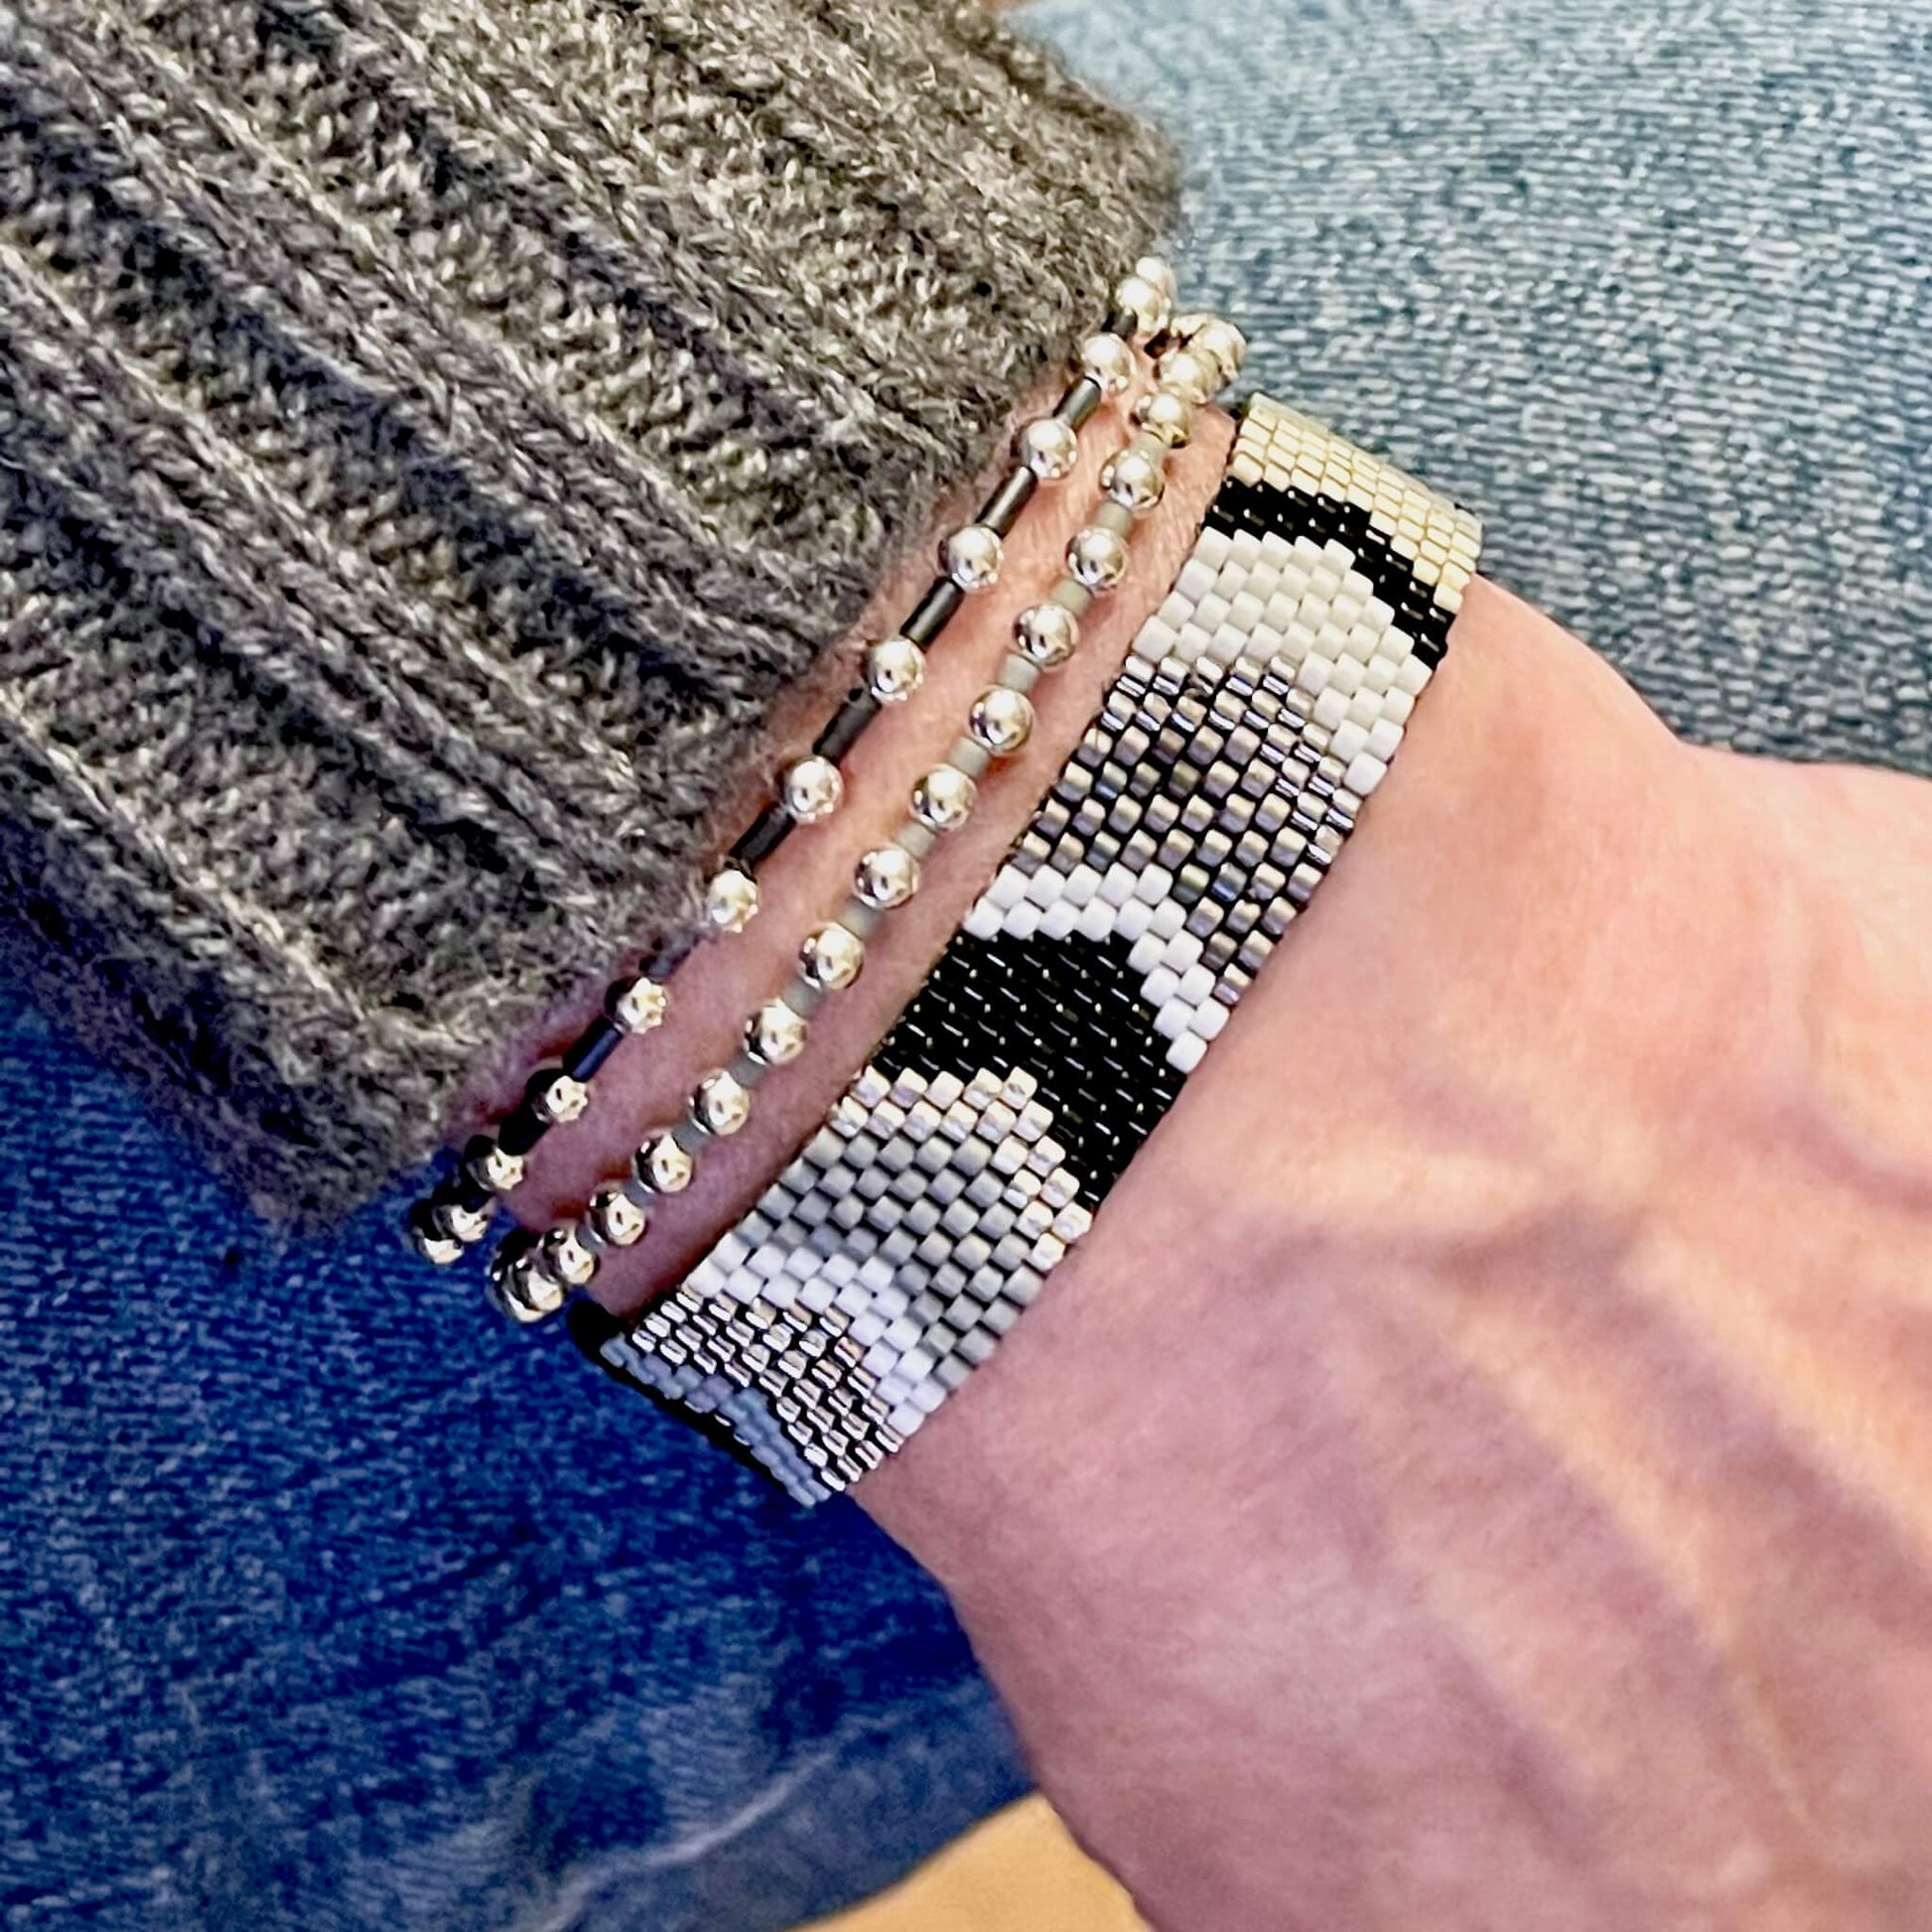 Black, white, and silver chevron beaded bracelet stack with a woven band and 2 coordinating stretch bracelets.